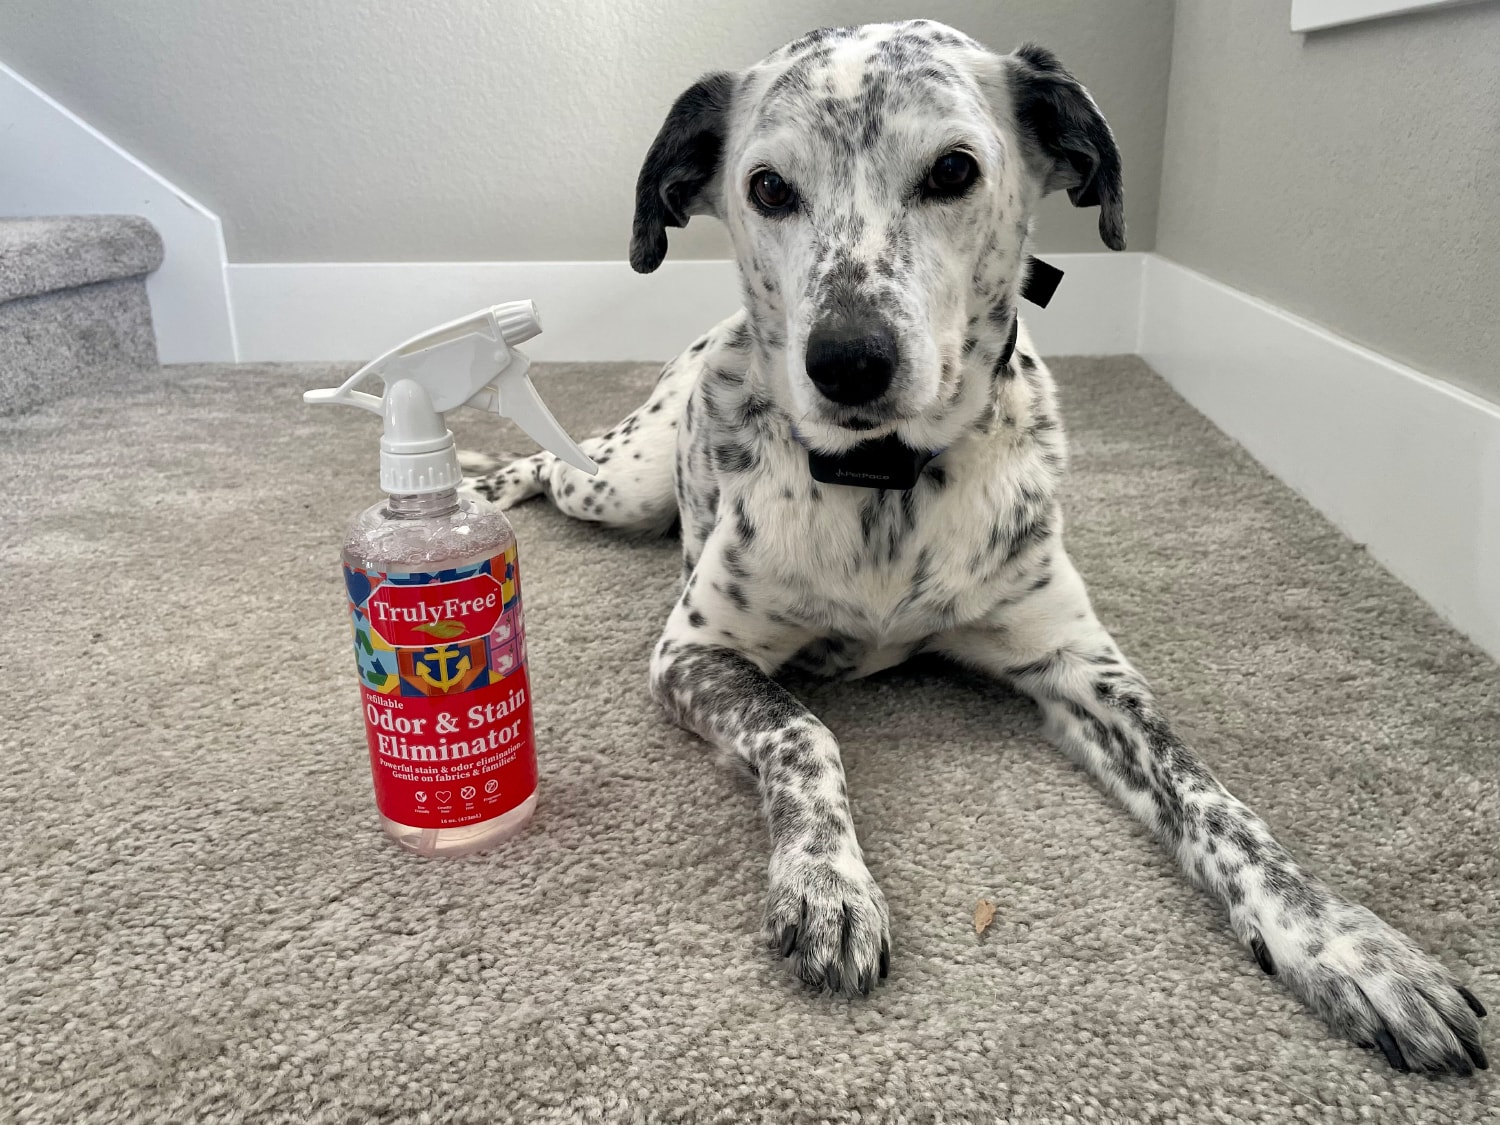 Truly Free Home Pet Cleaning Kit - Odor and Stain Eliminator